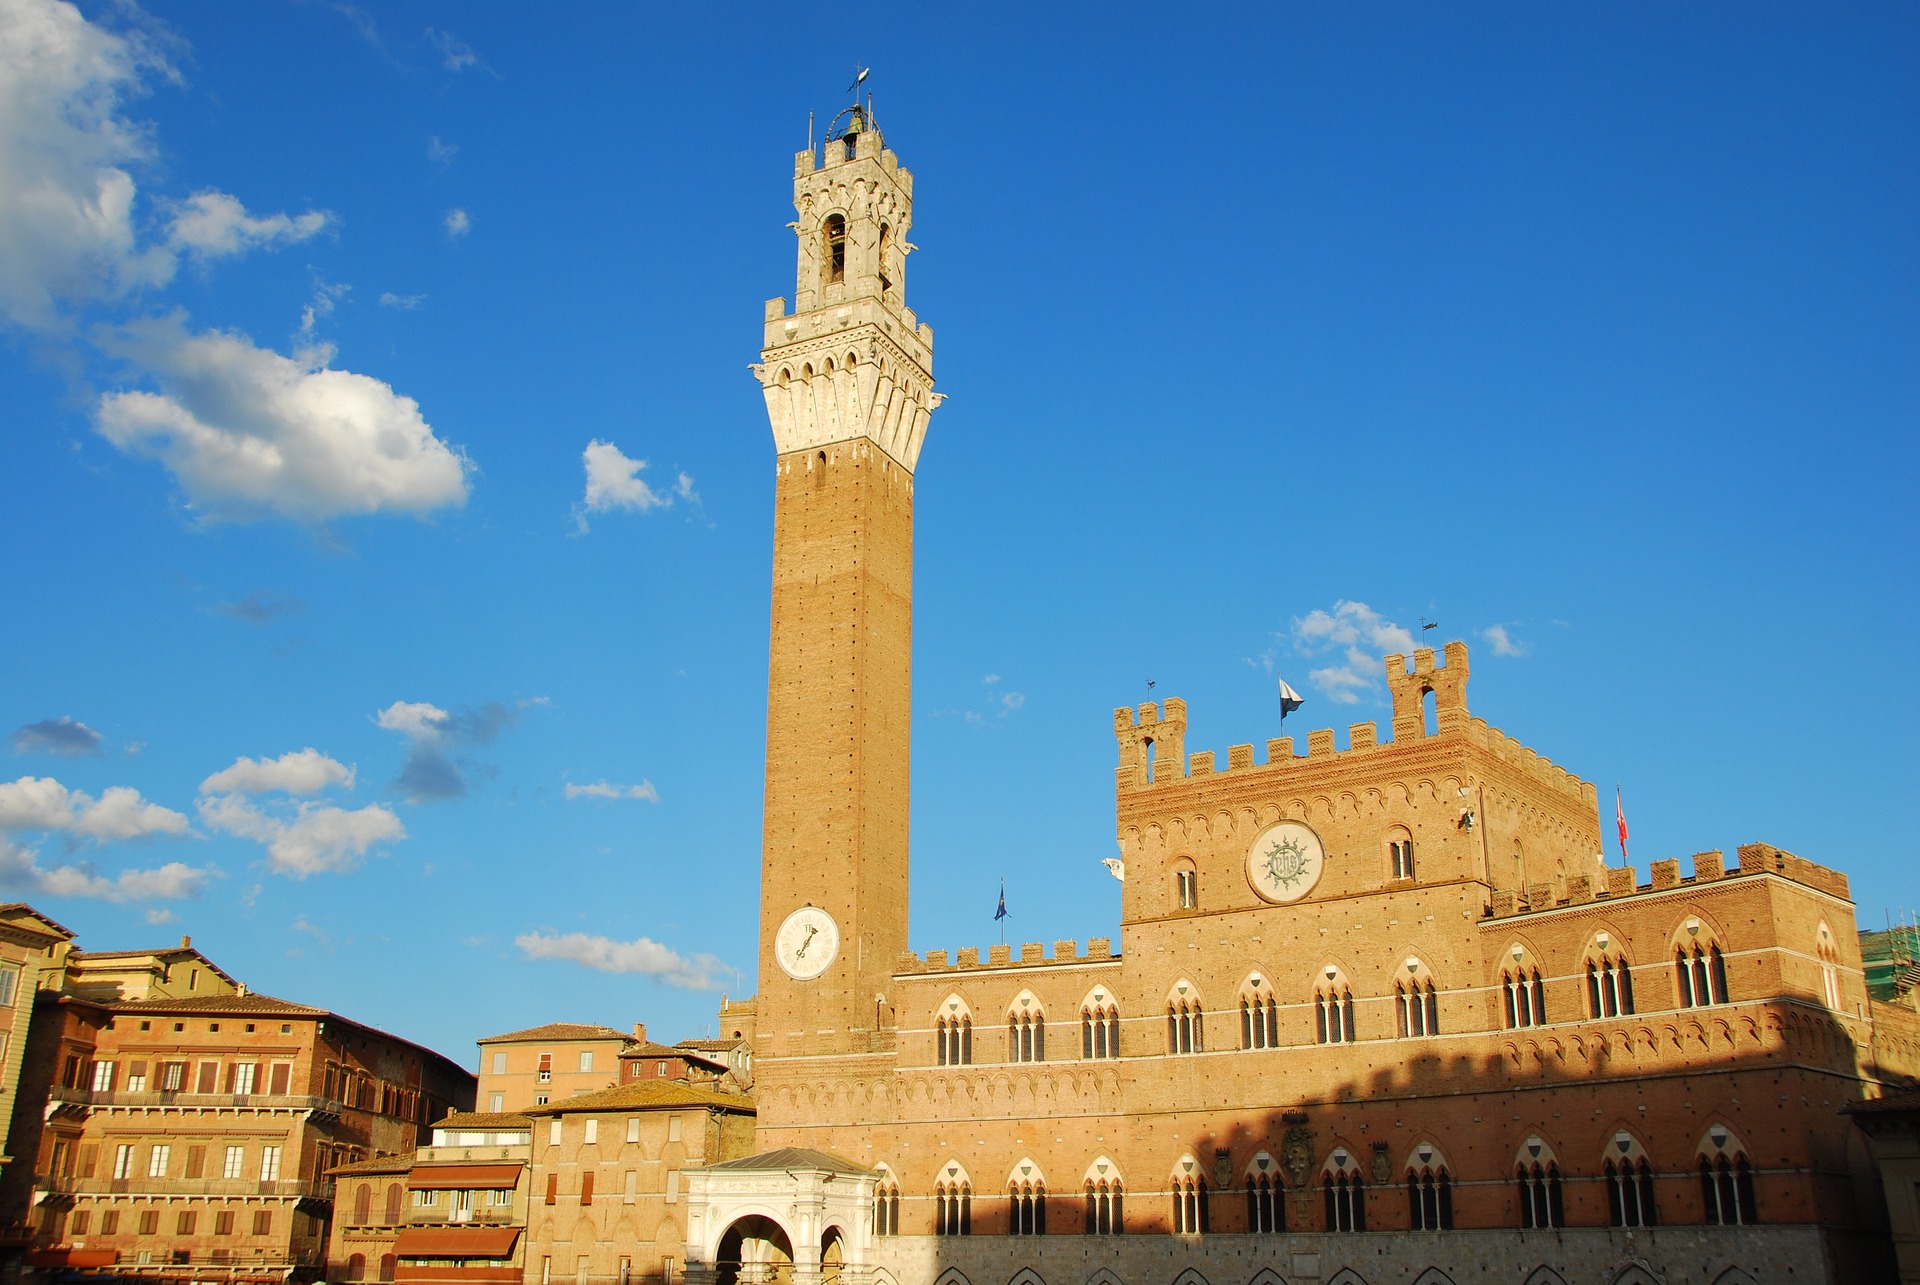 Highlights Of Siena - Half day tour